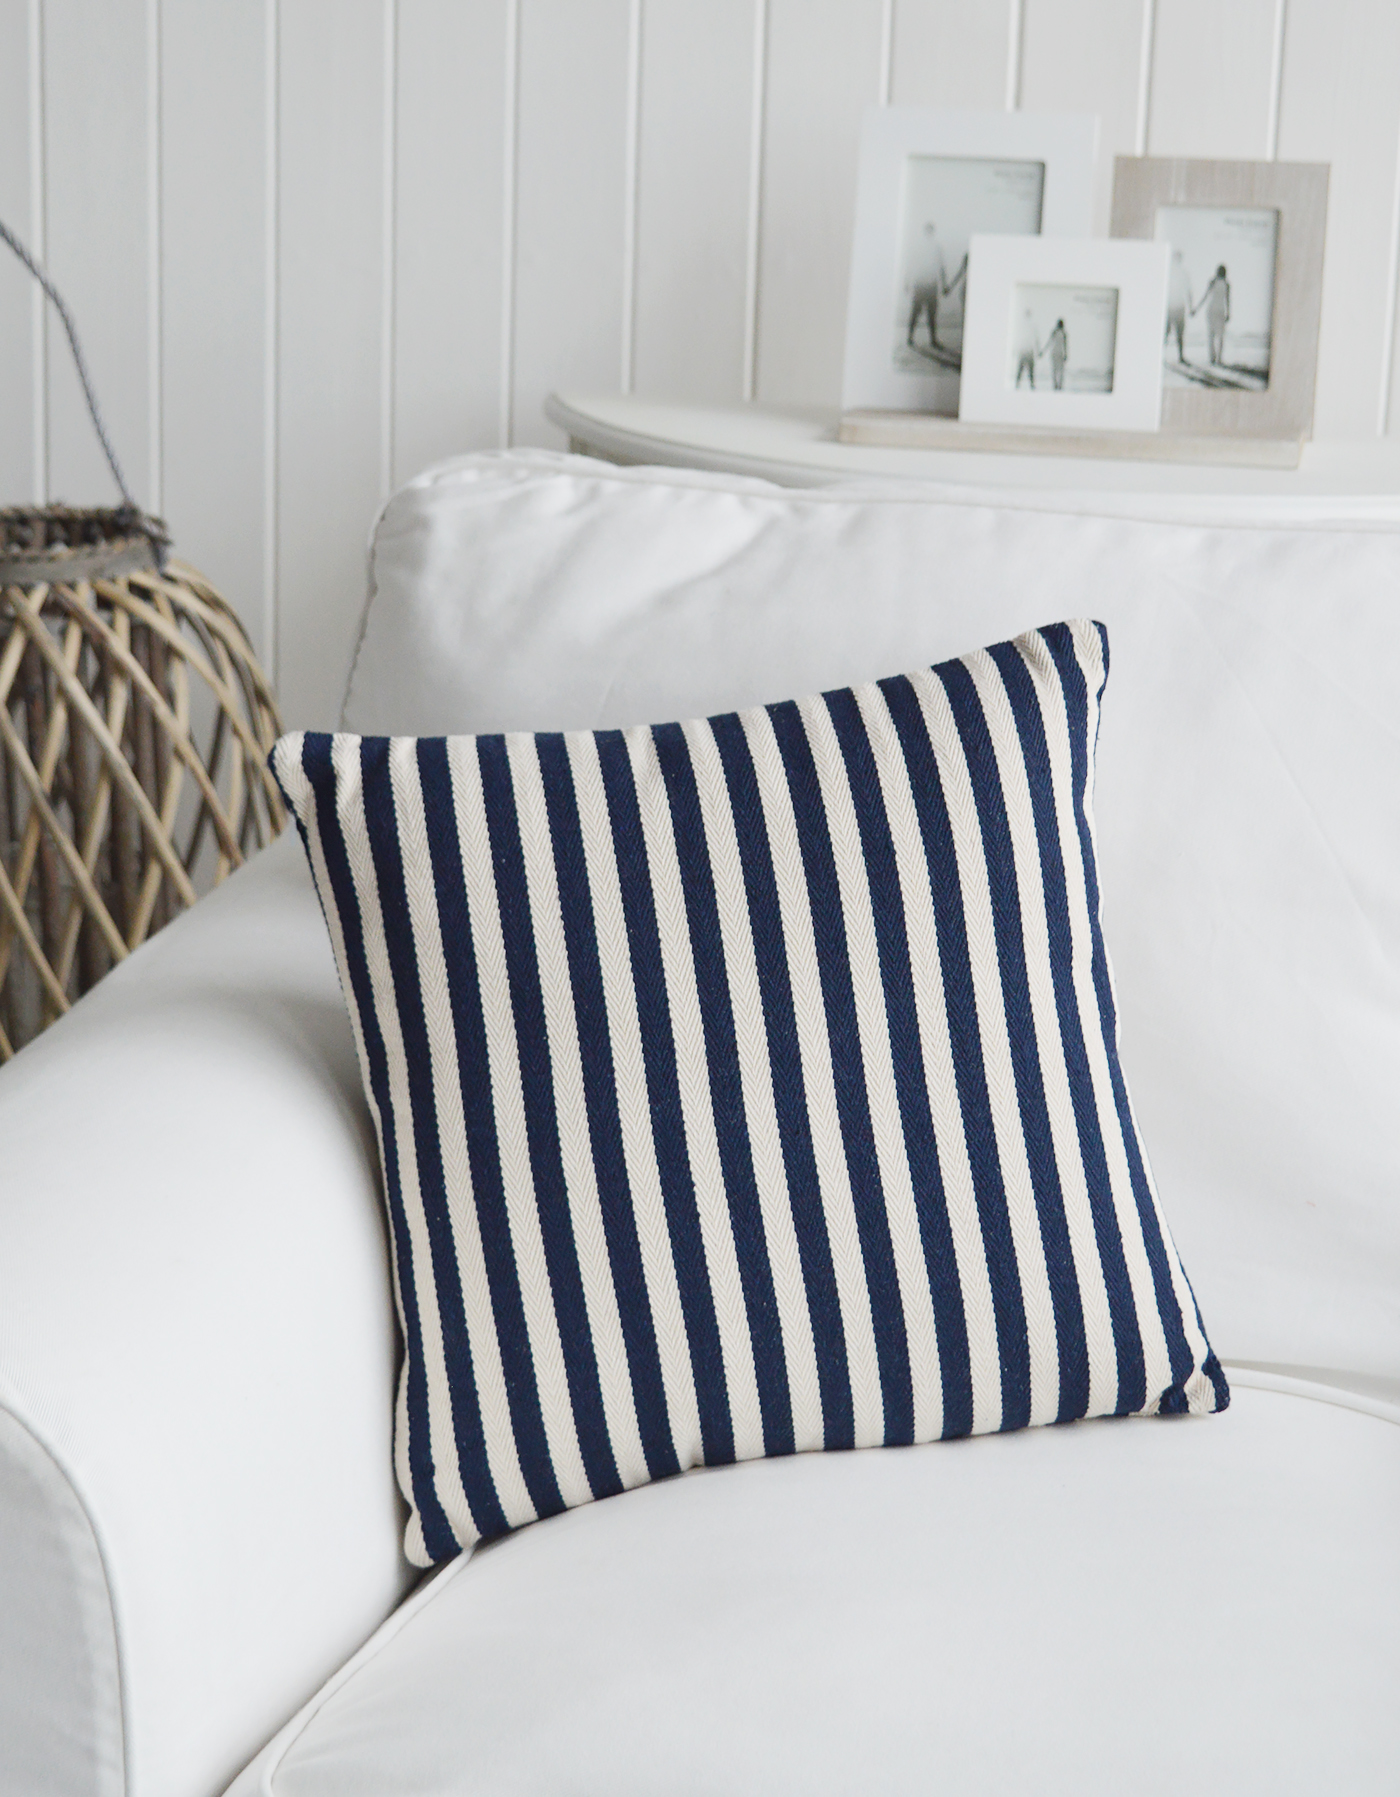 The White Lighthouse. New England Style Country, Coastal and White Furniture and accessories for the home. New England cushions and soft furnishing - Harrison Navy Blue and White Stripe Cushion